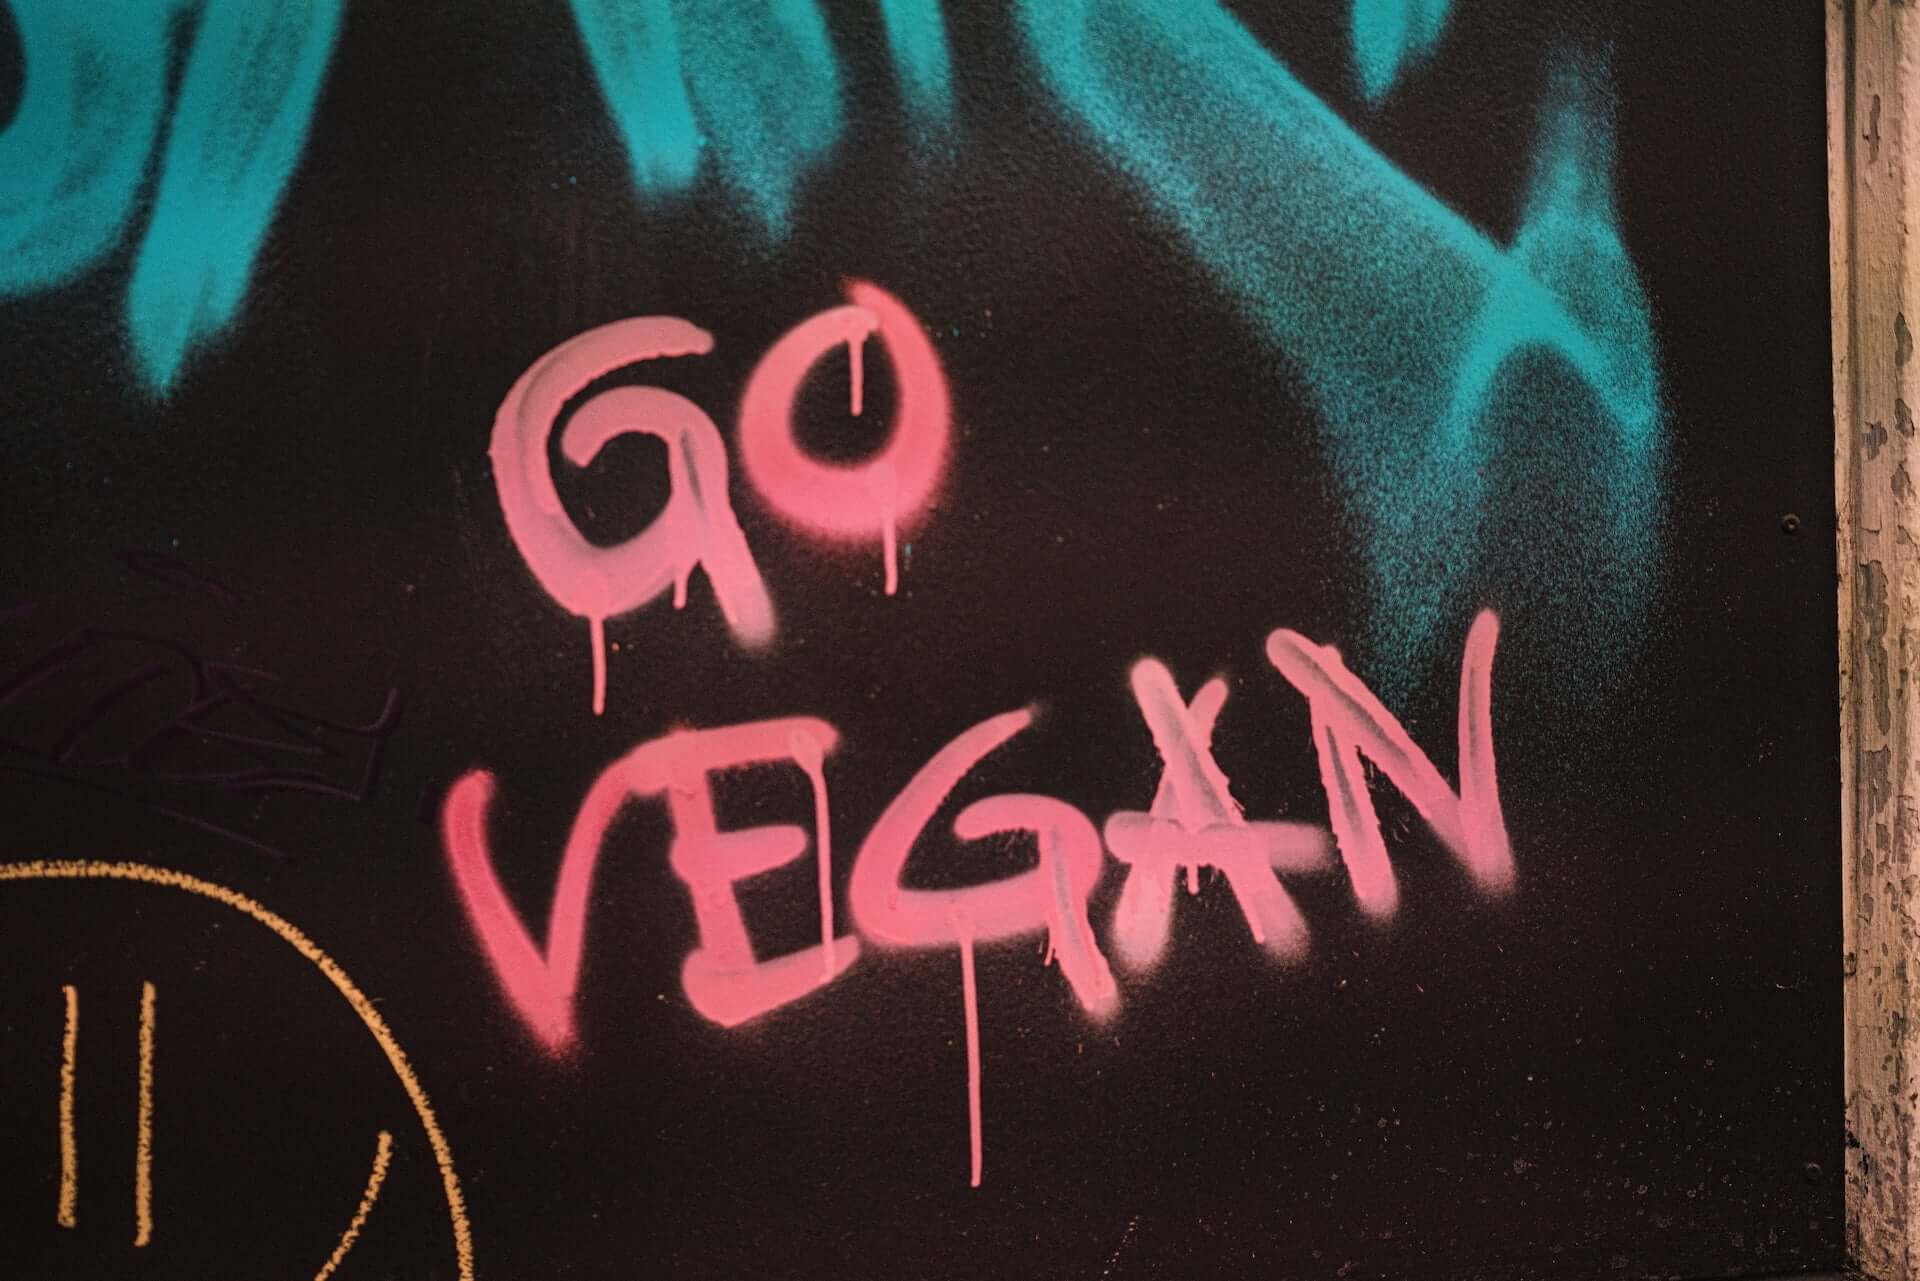 Pink spray paint on a black wall that reads "GO VEGAN."